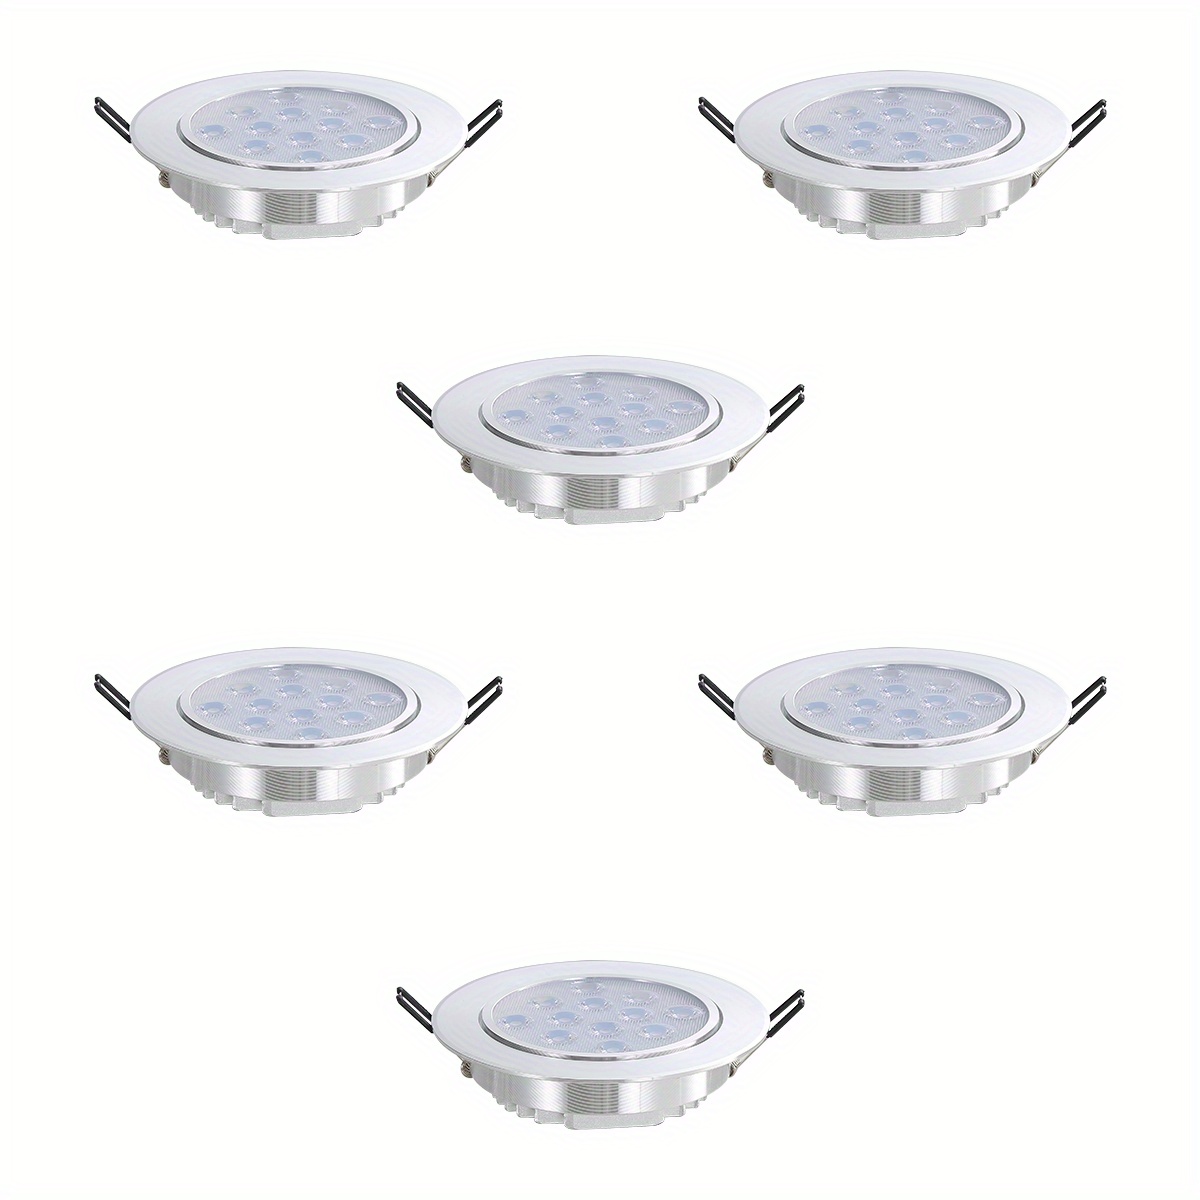 6pcs ultra bright 3w led recessed ceiling lights modern round metal panel down light for commercial office mall hotel and corridor lighting details 6